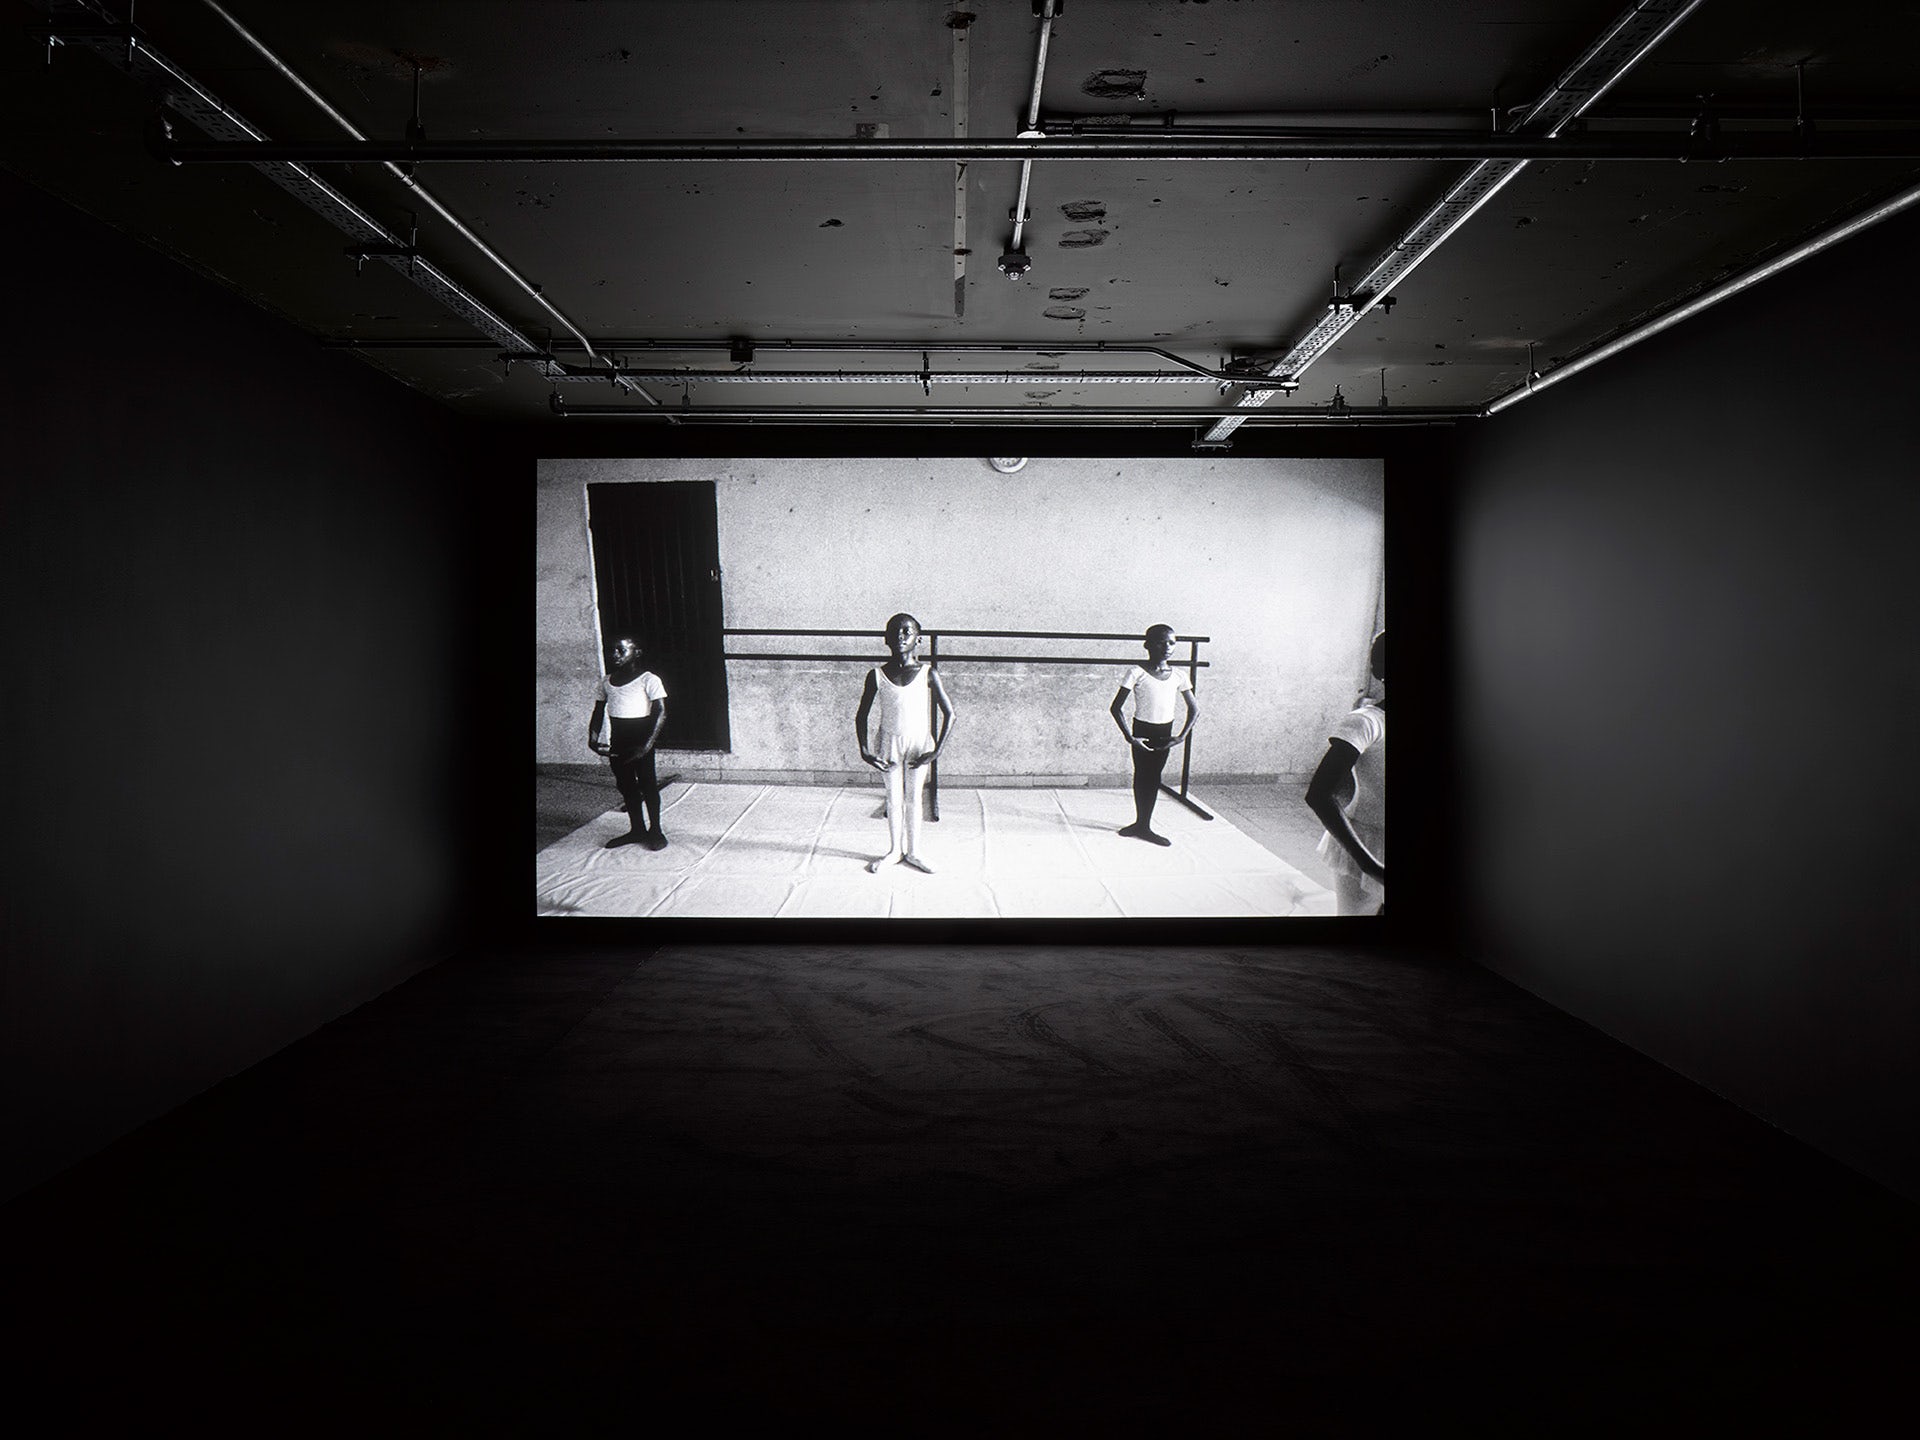 Photograph showing ballet dancers poised in Gabriel Moses's film Ijo, installed in a darkened room at 180 Studios